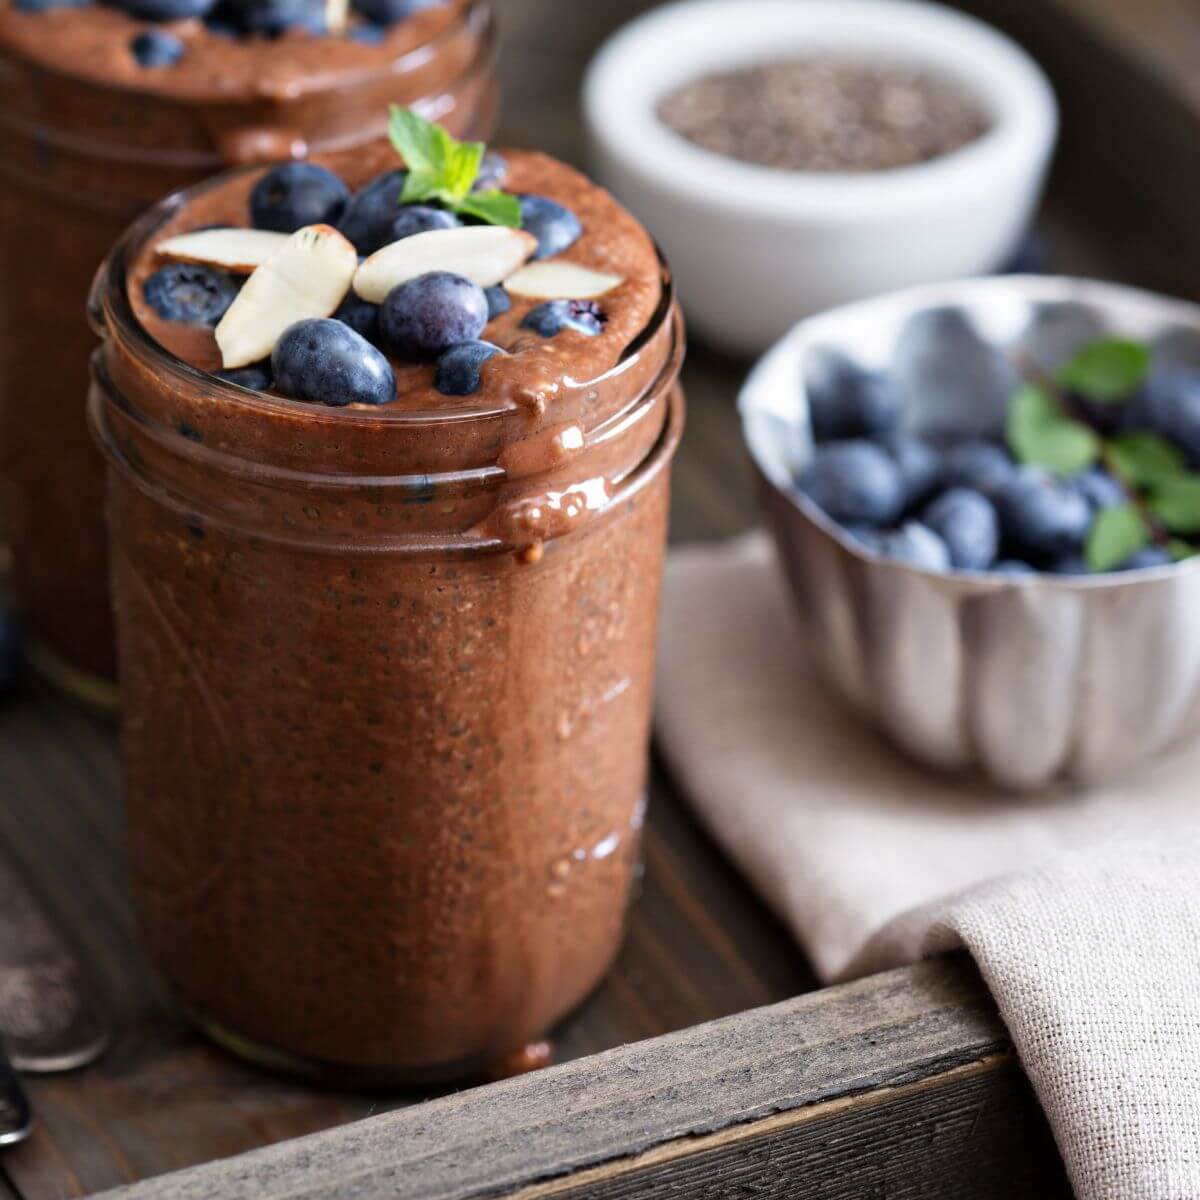 Best memory boosting food, try an avocado pudding with blueberry